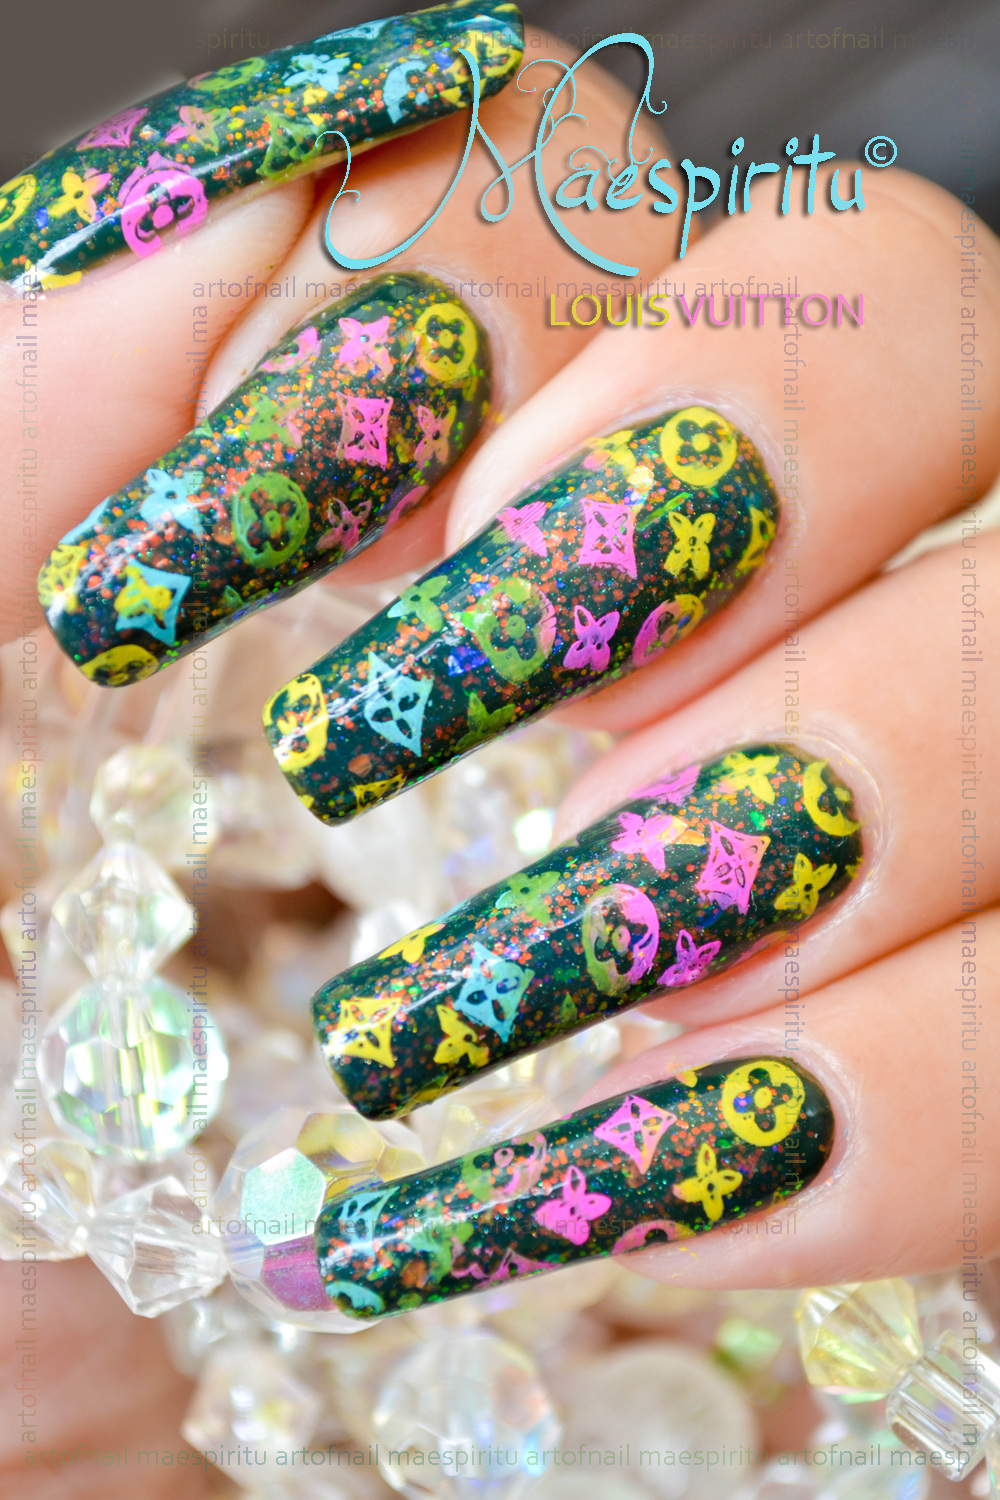 ART OF NAIL: Louis Vuitton Nails and More!